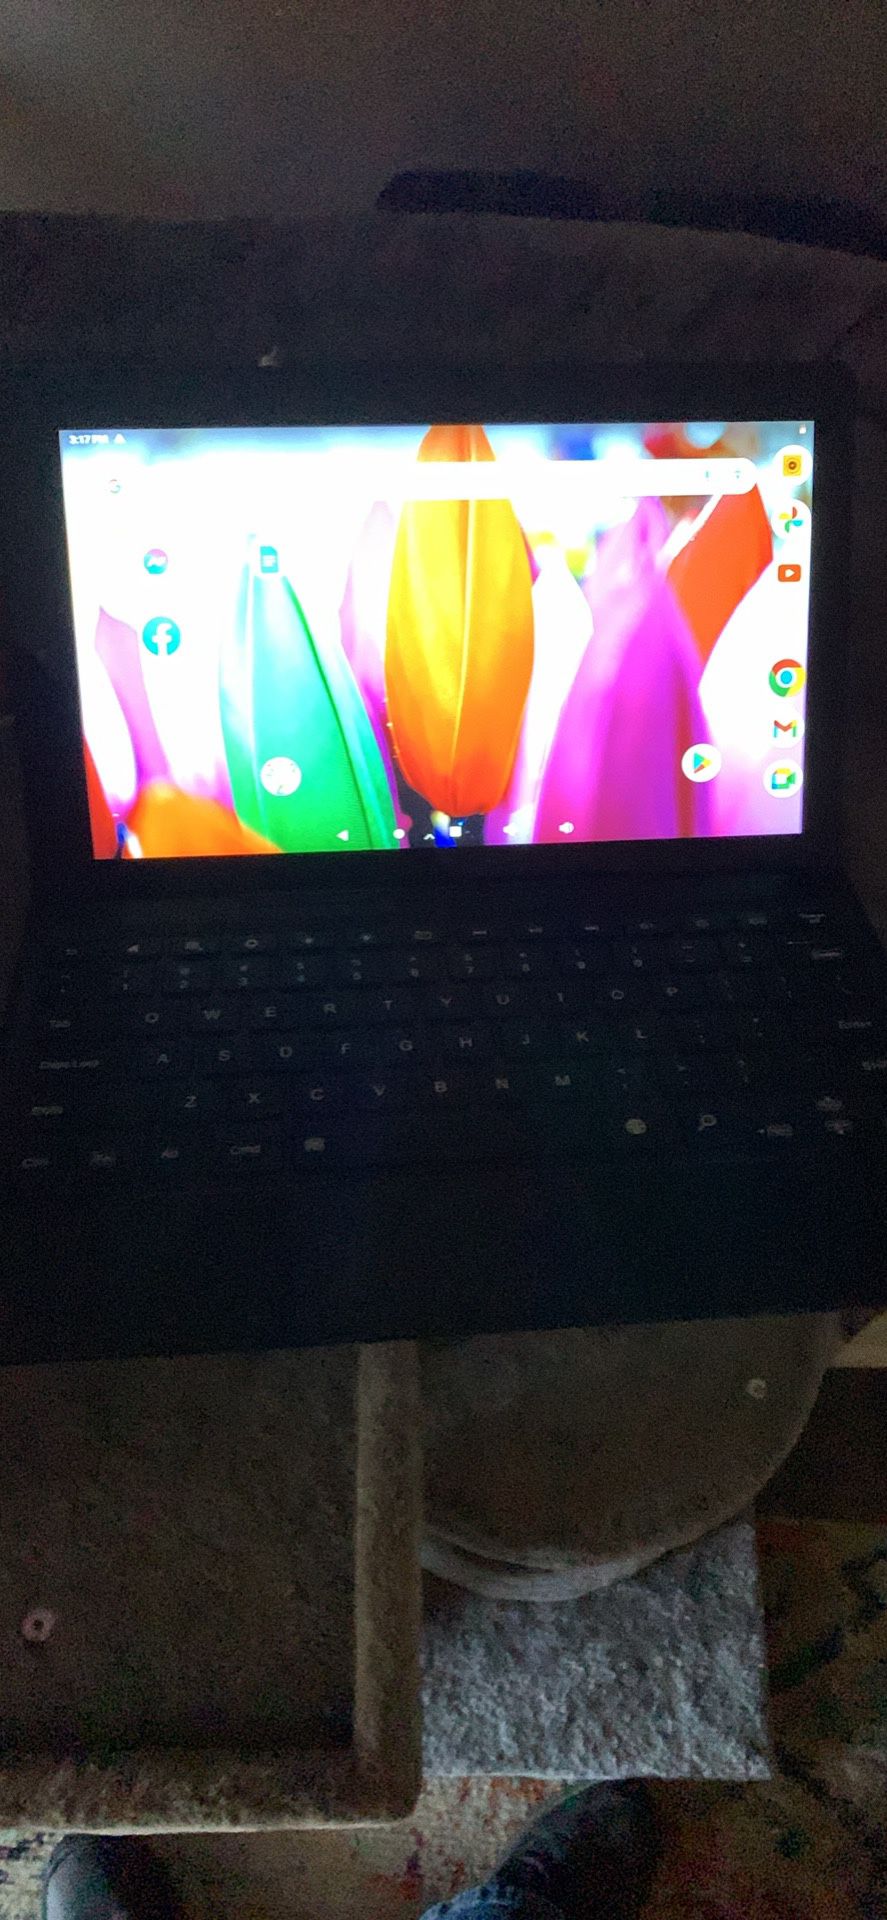 RCA 11 Delta Pro 32 Gb 11.6” Tablet with Keyboard Attachment 